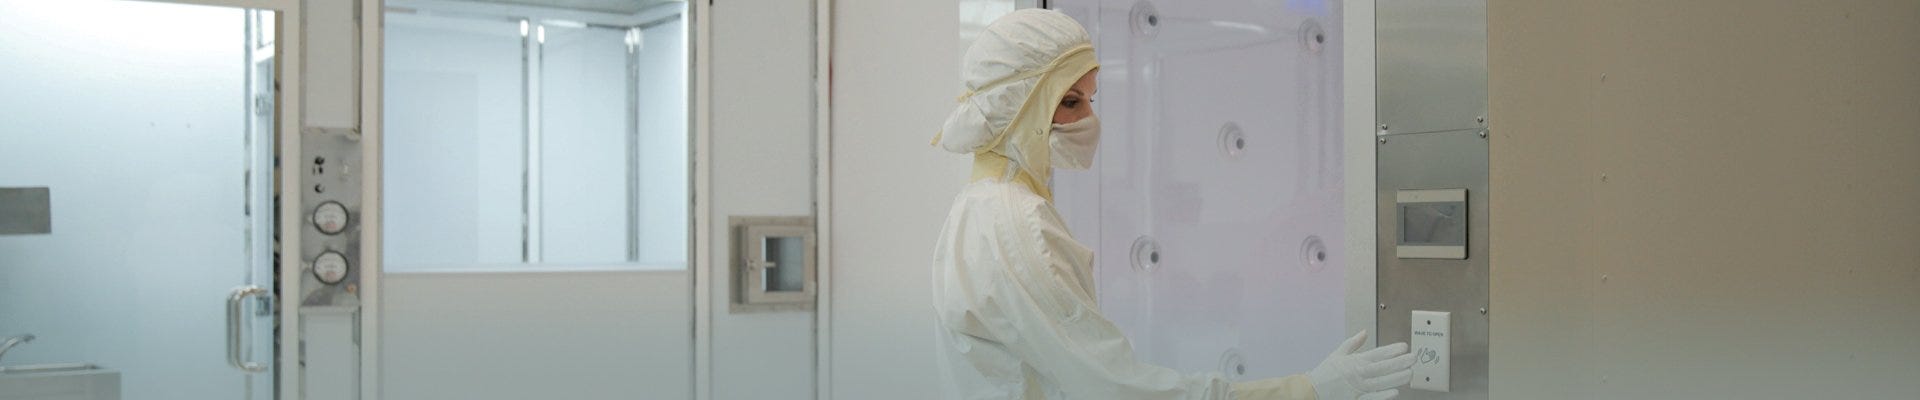 Cleanroom air showers provide an extra measure of cleanliness for personnel and equipment